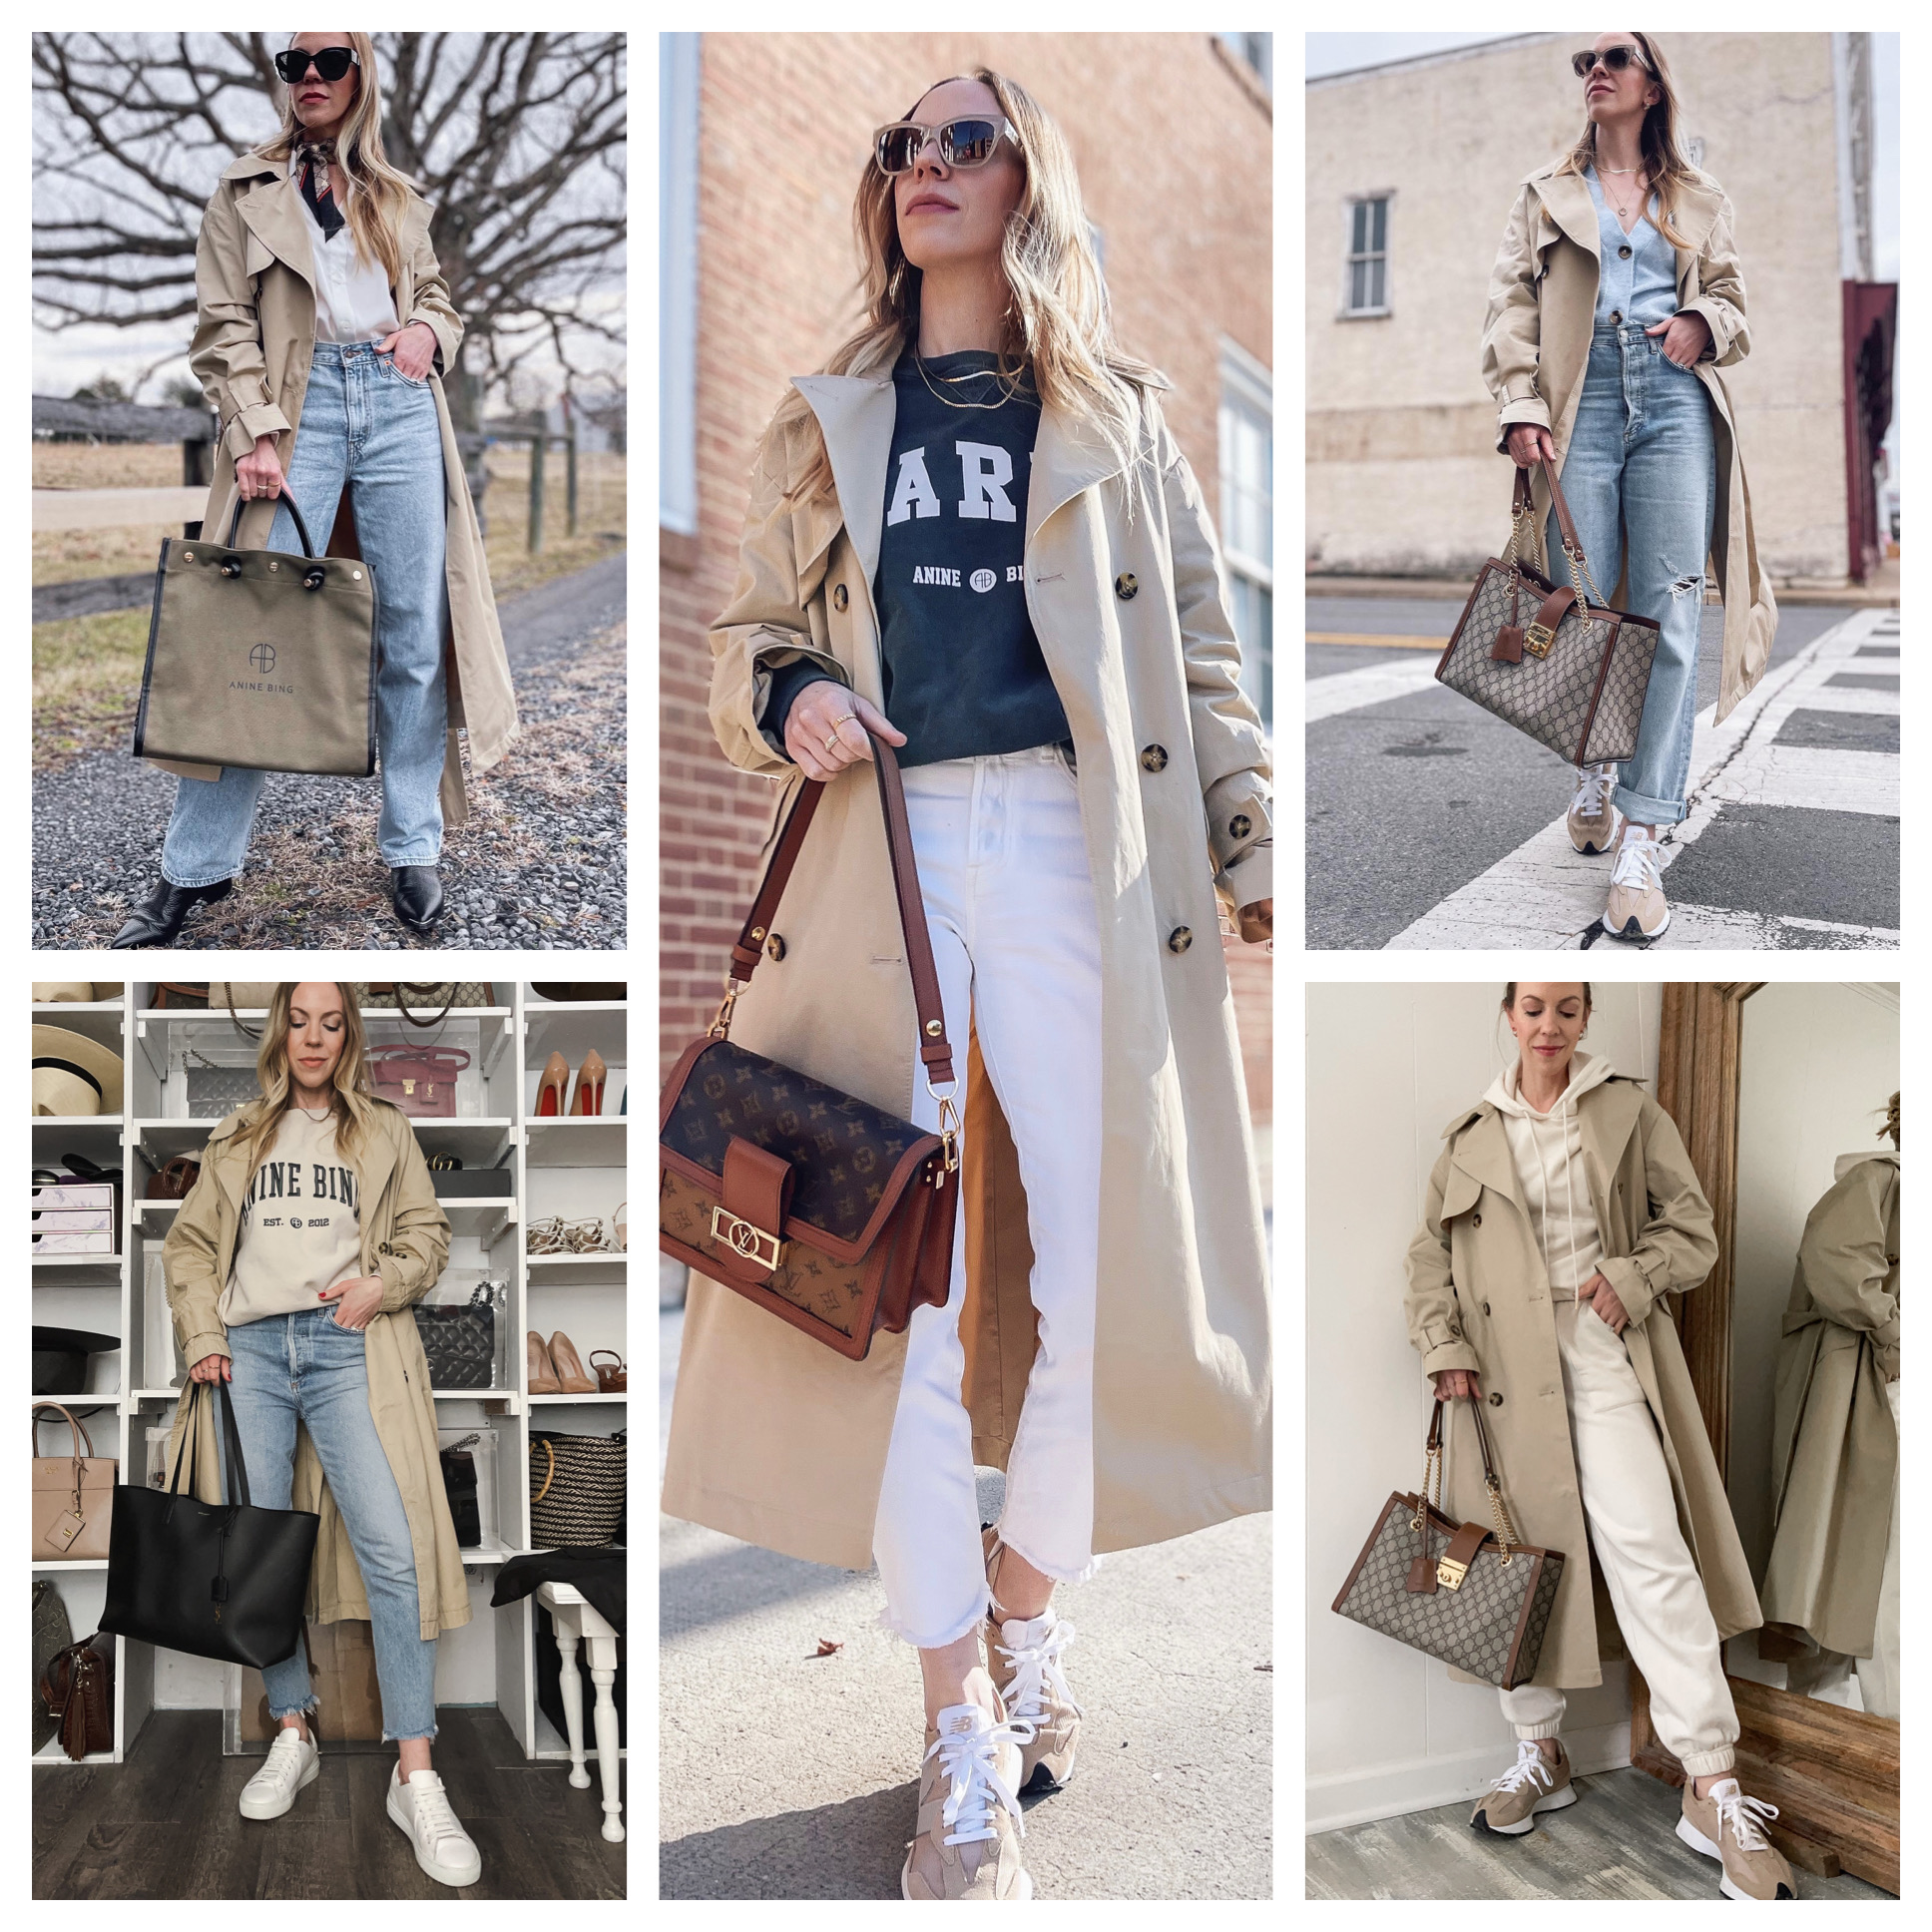 Spring Fashion Trends: Trench Coats and Outfit Ideas Around Spring